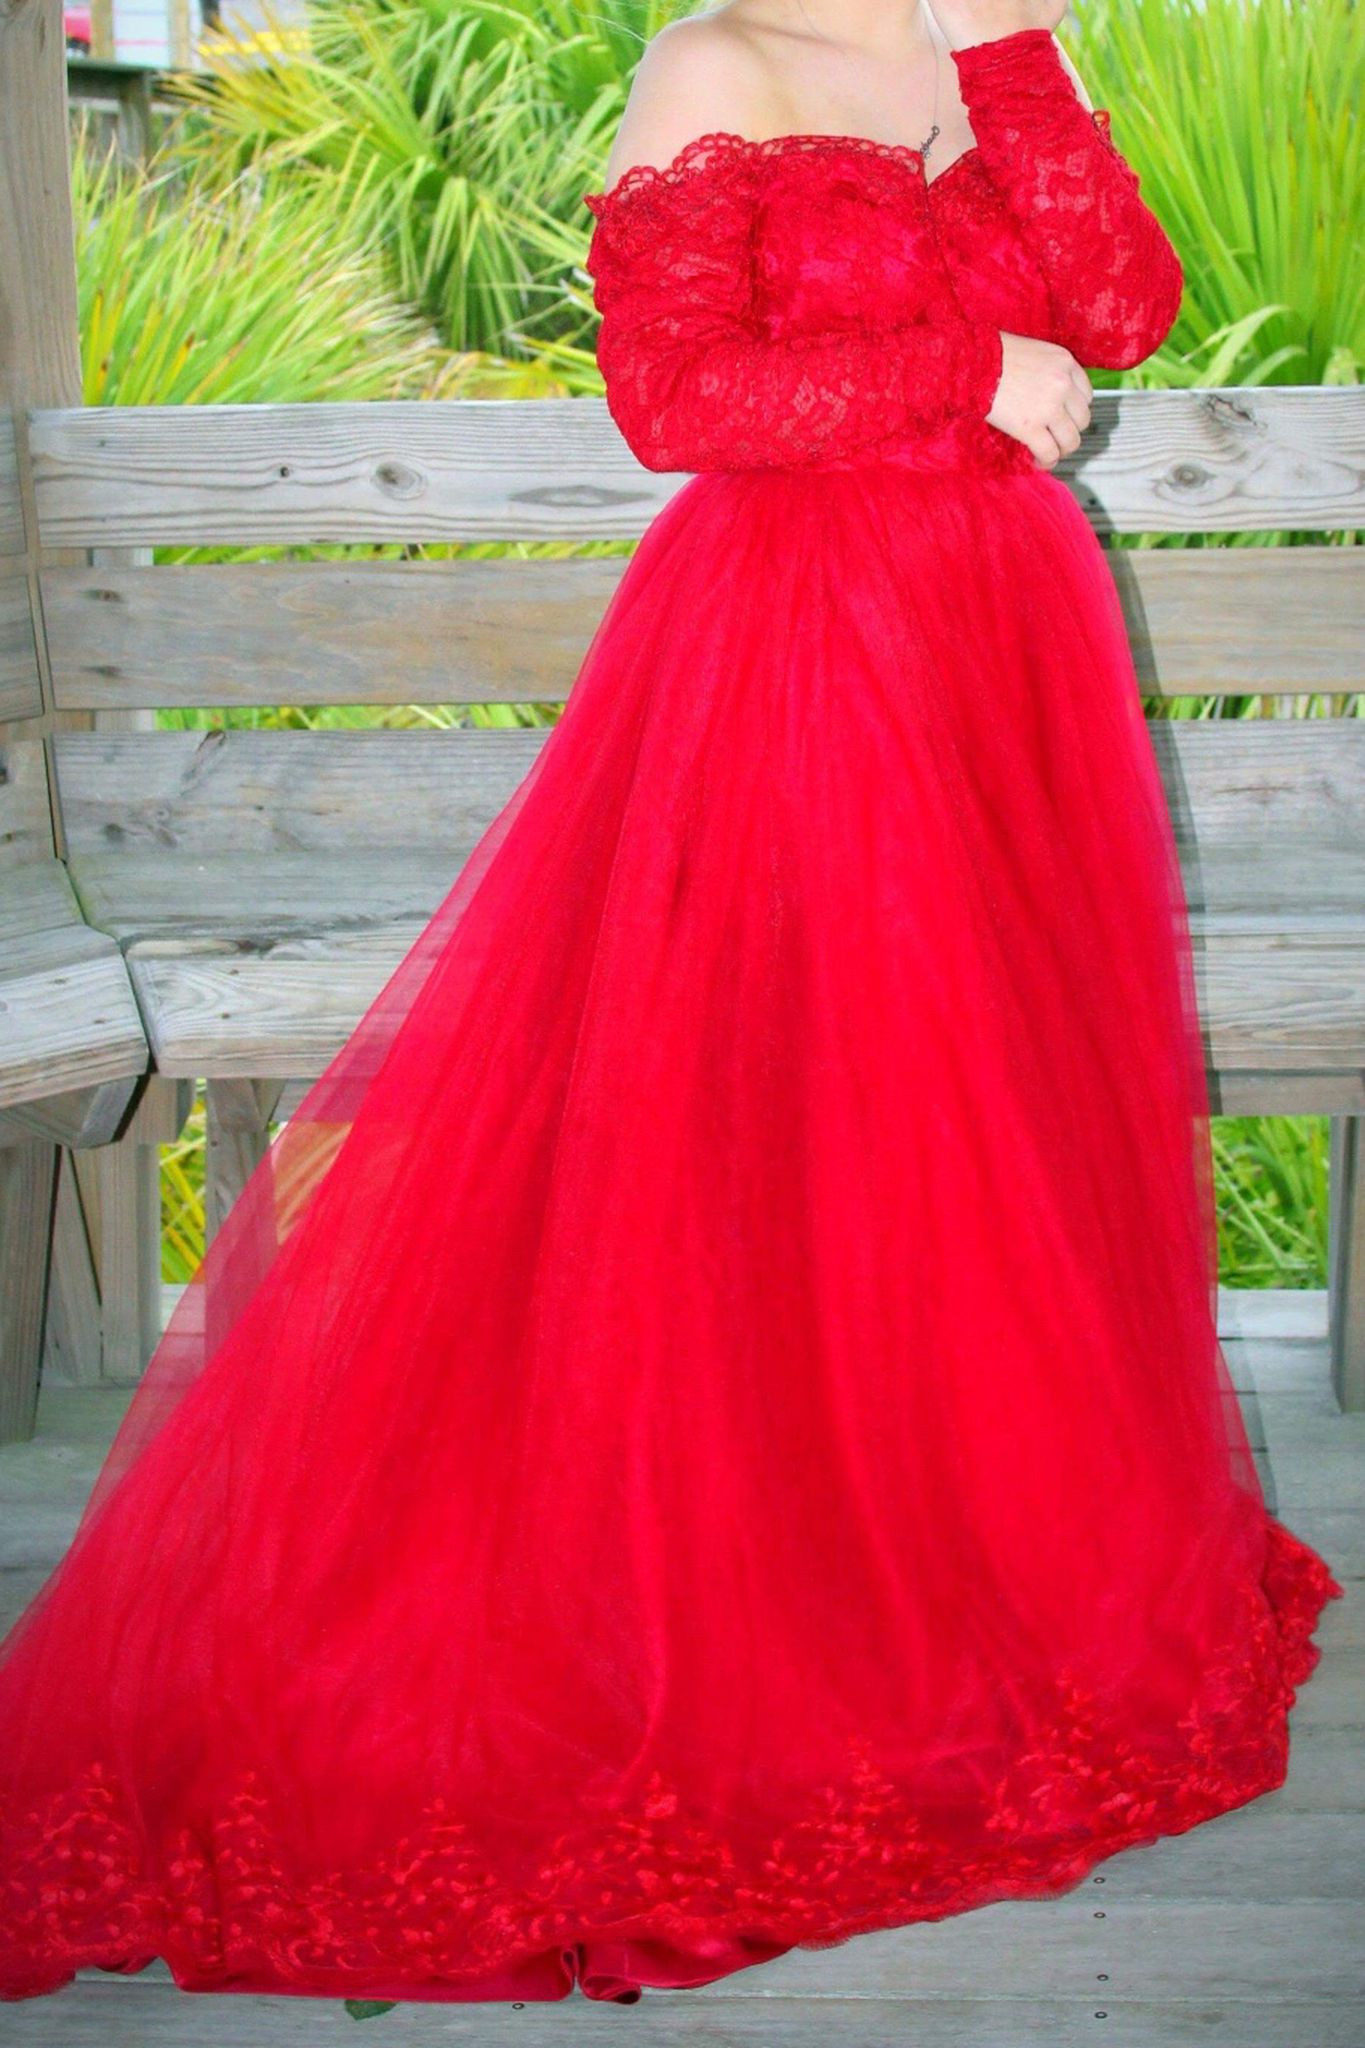 Red Prom Dress Size 8